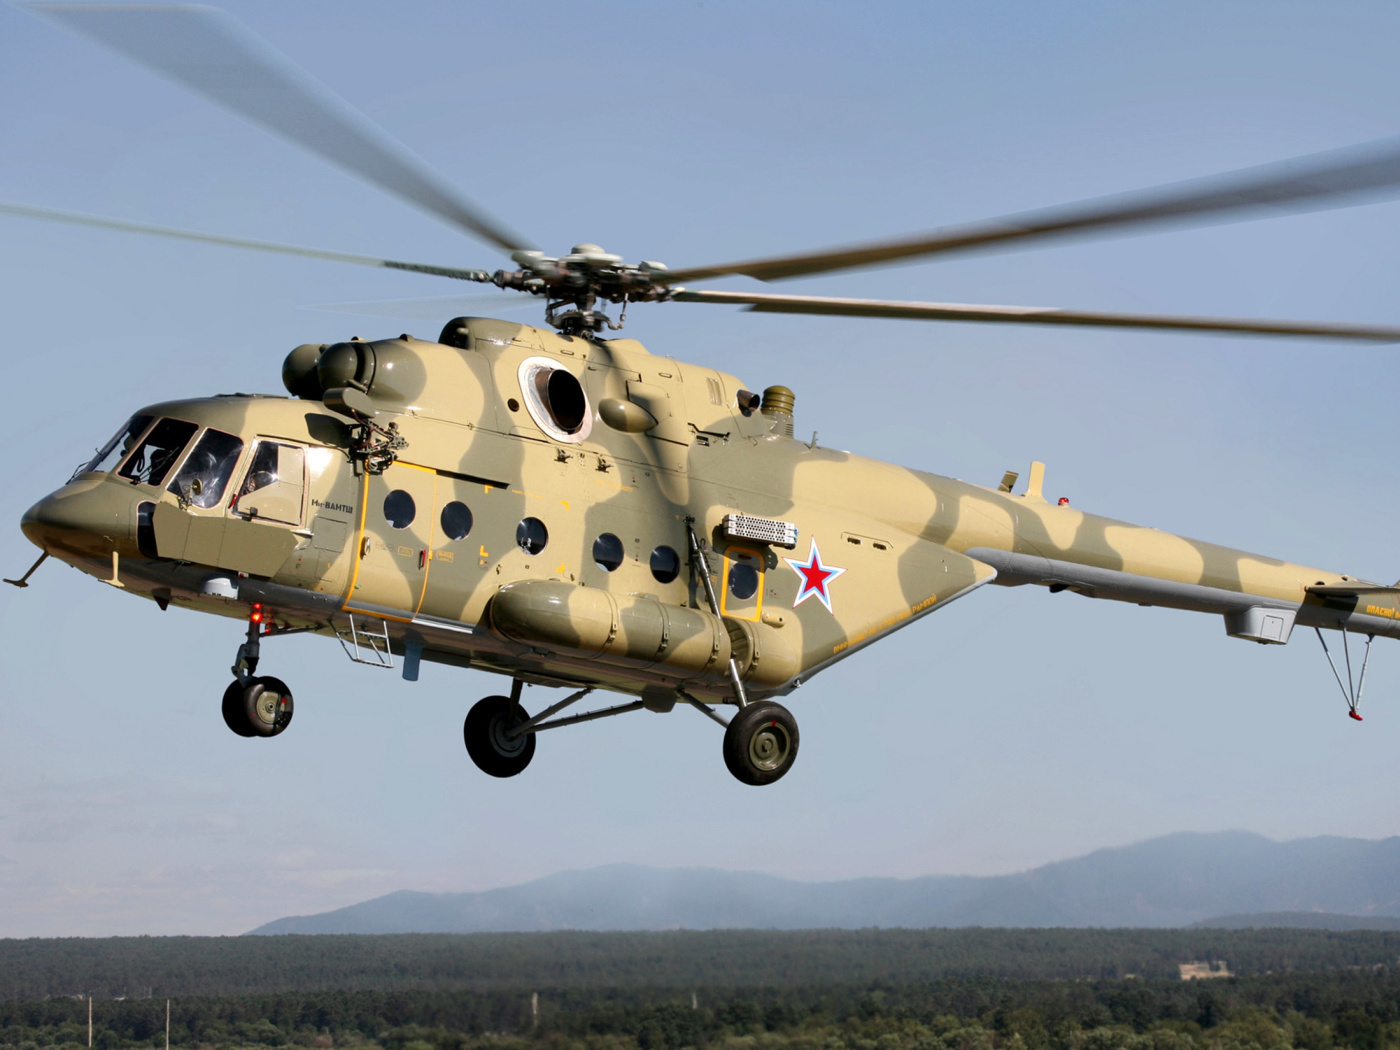 Mil Mi 17 Russian Helicopter wallpaper 1400x1050